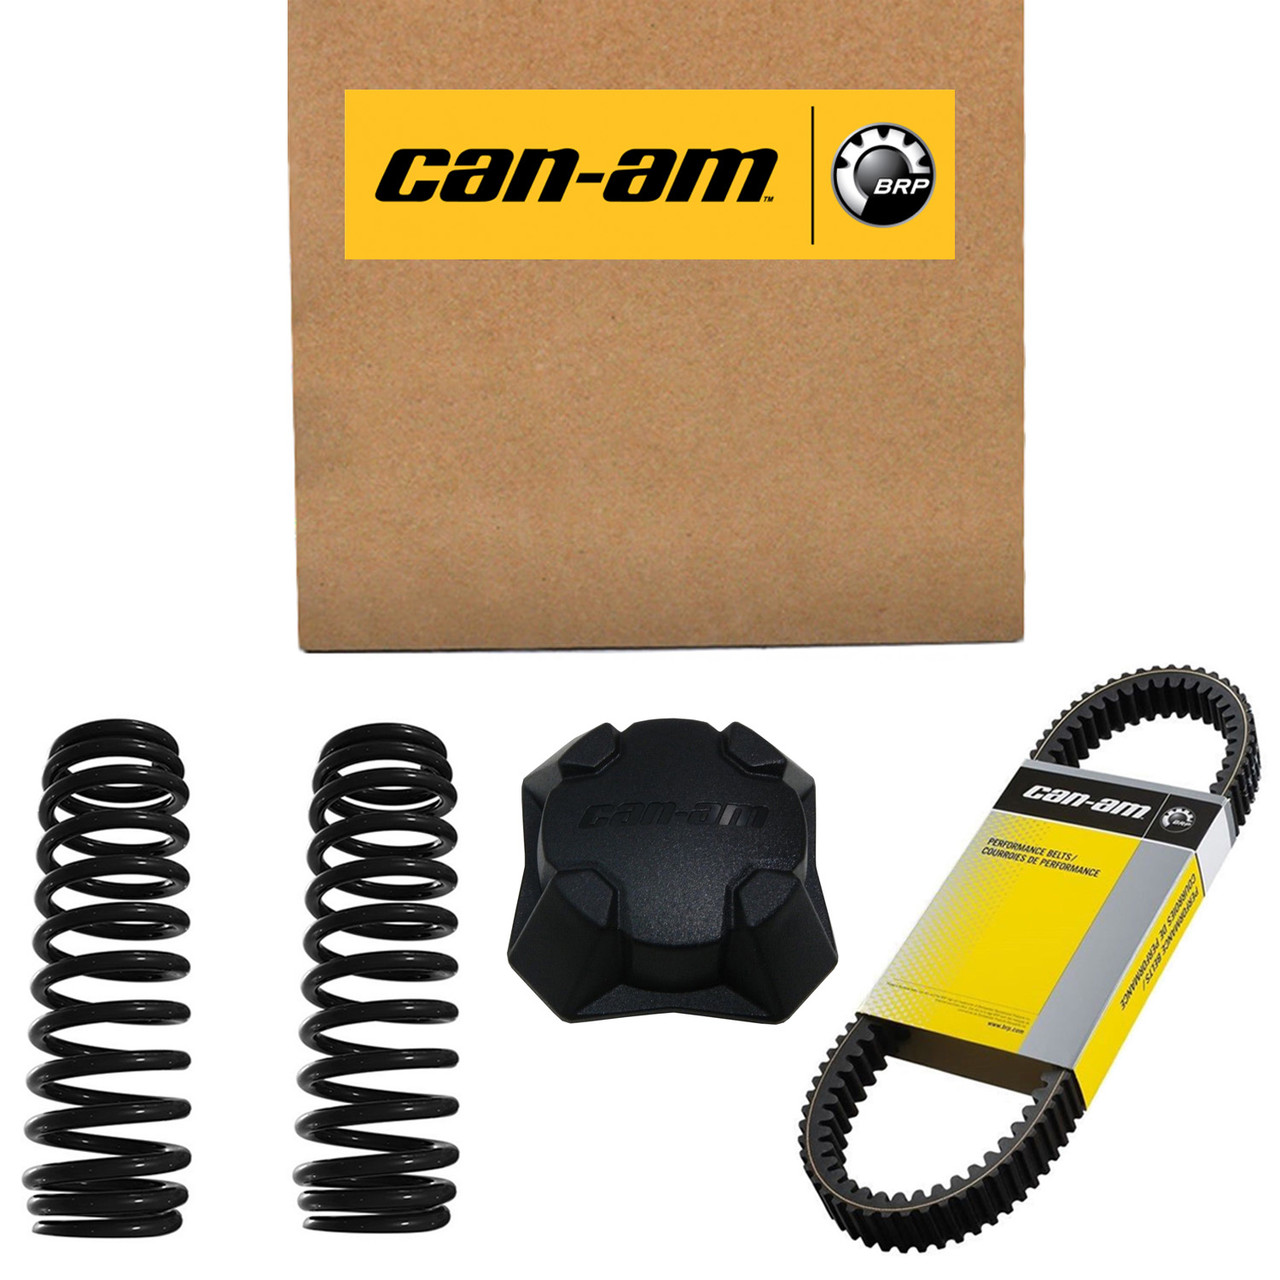 Can-Am New OEM Electronic Box, 420666684